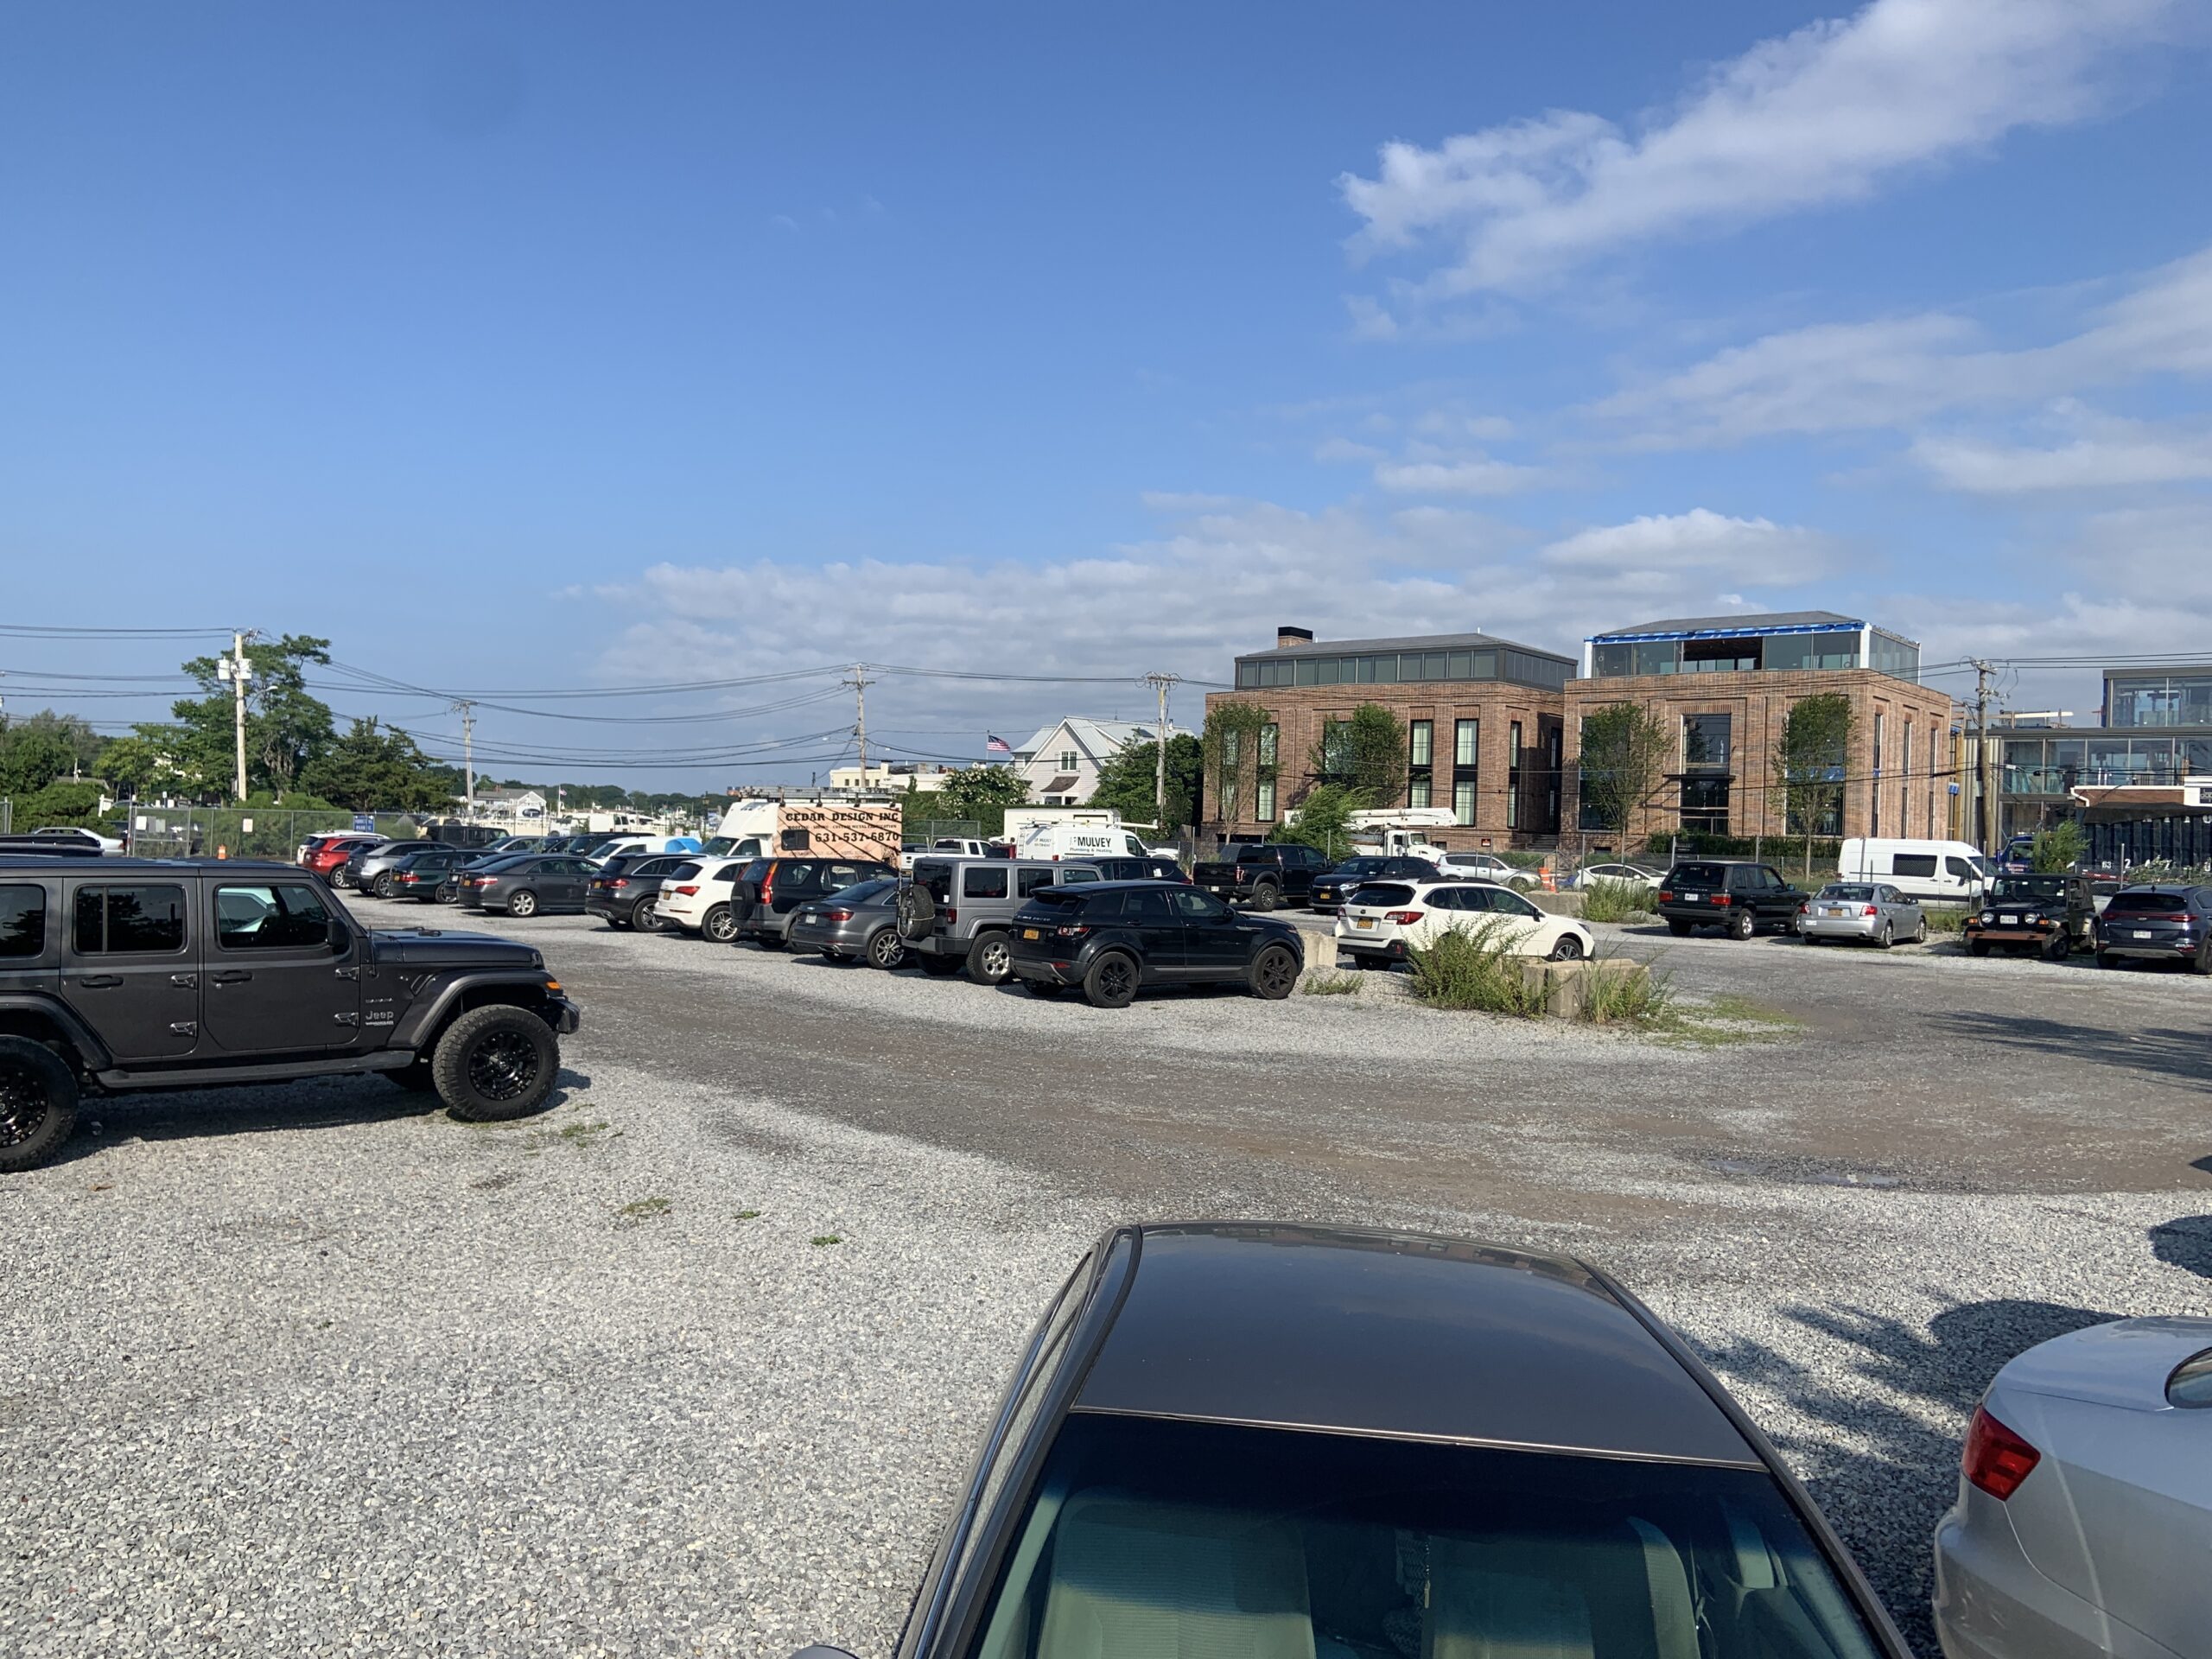 Under a deal reached with Adam Potter, Sag Harbor Village will retain control of the gas ball parking lot. STEPHEN J. KOTZ